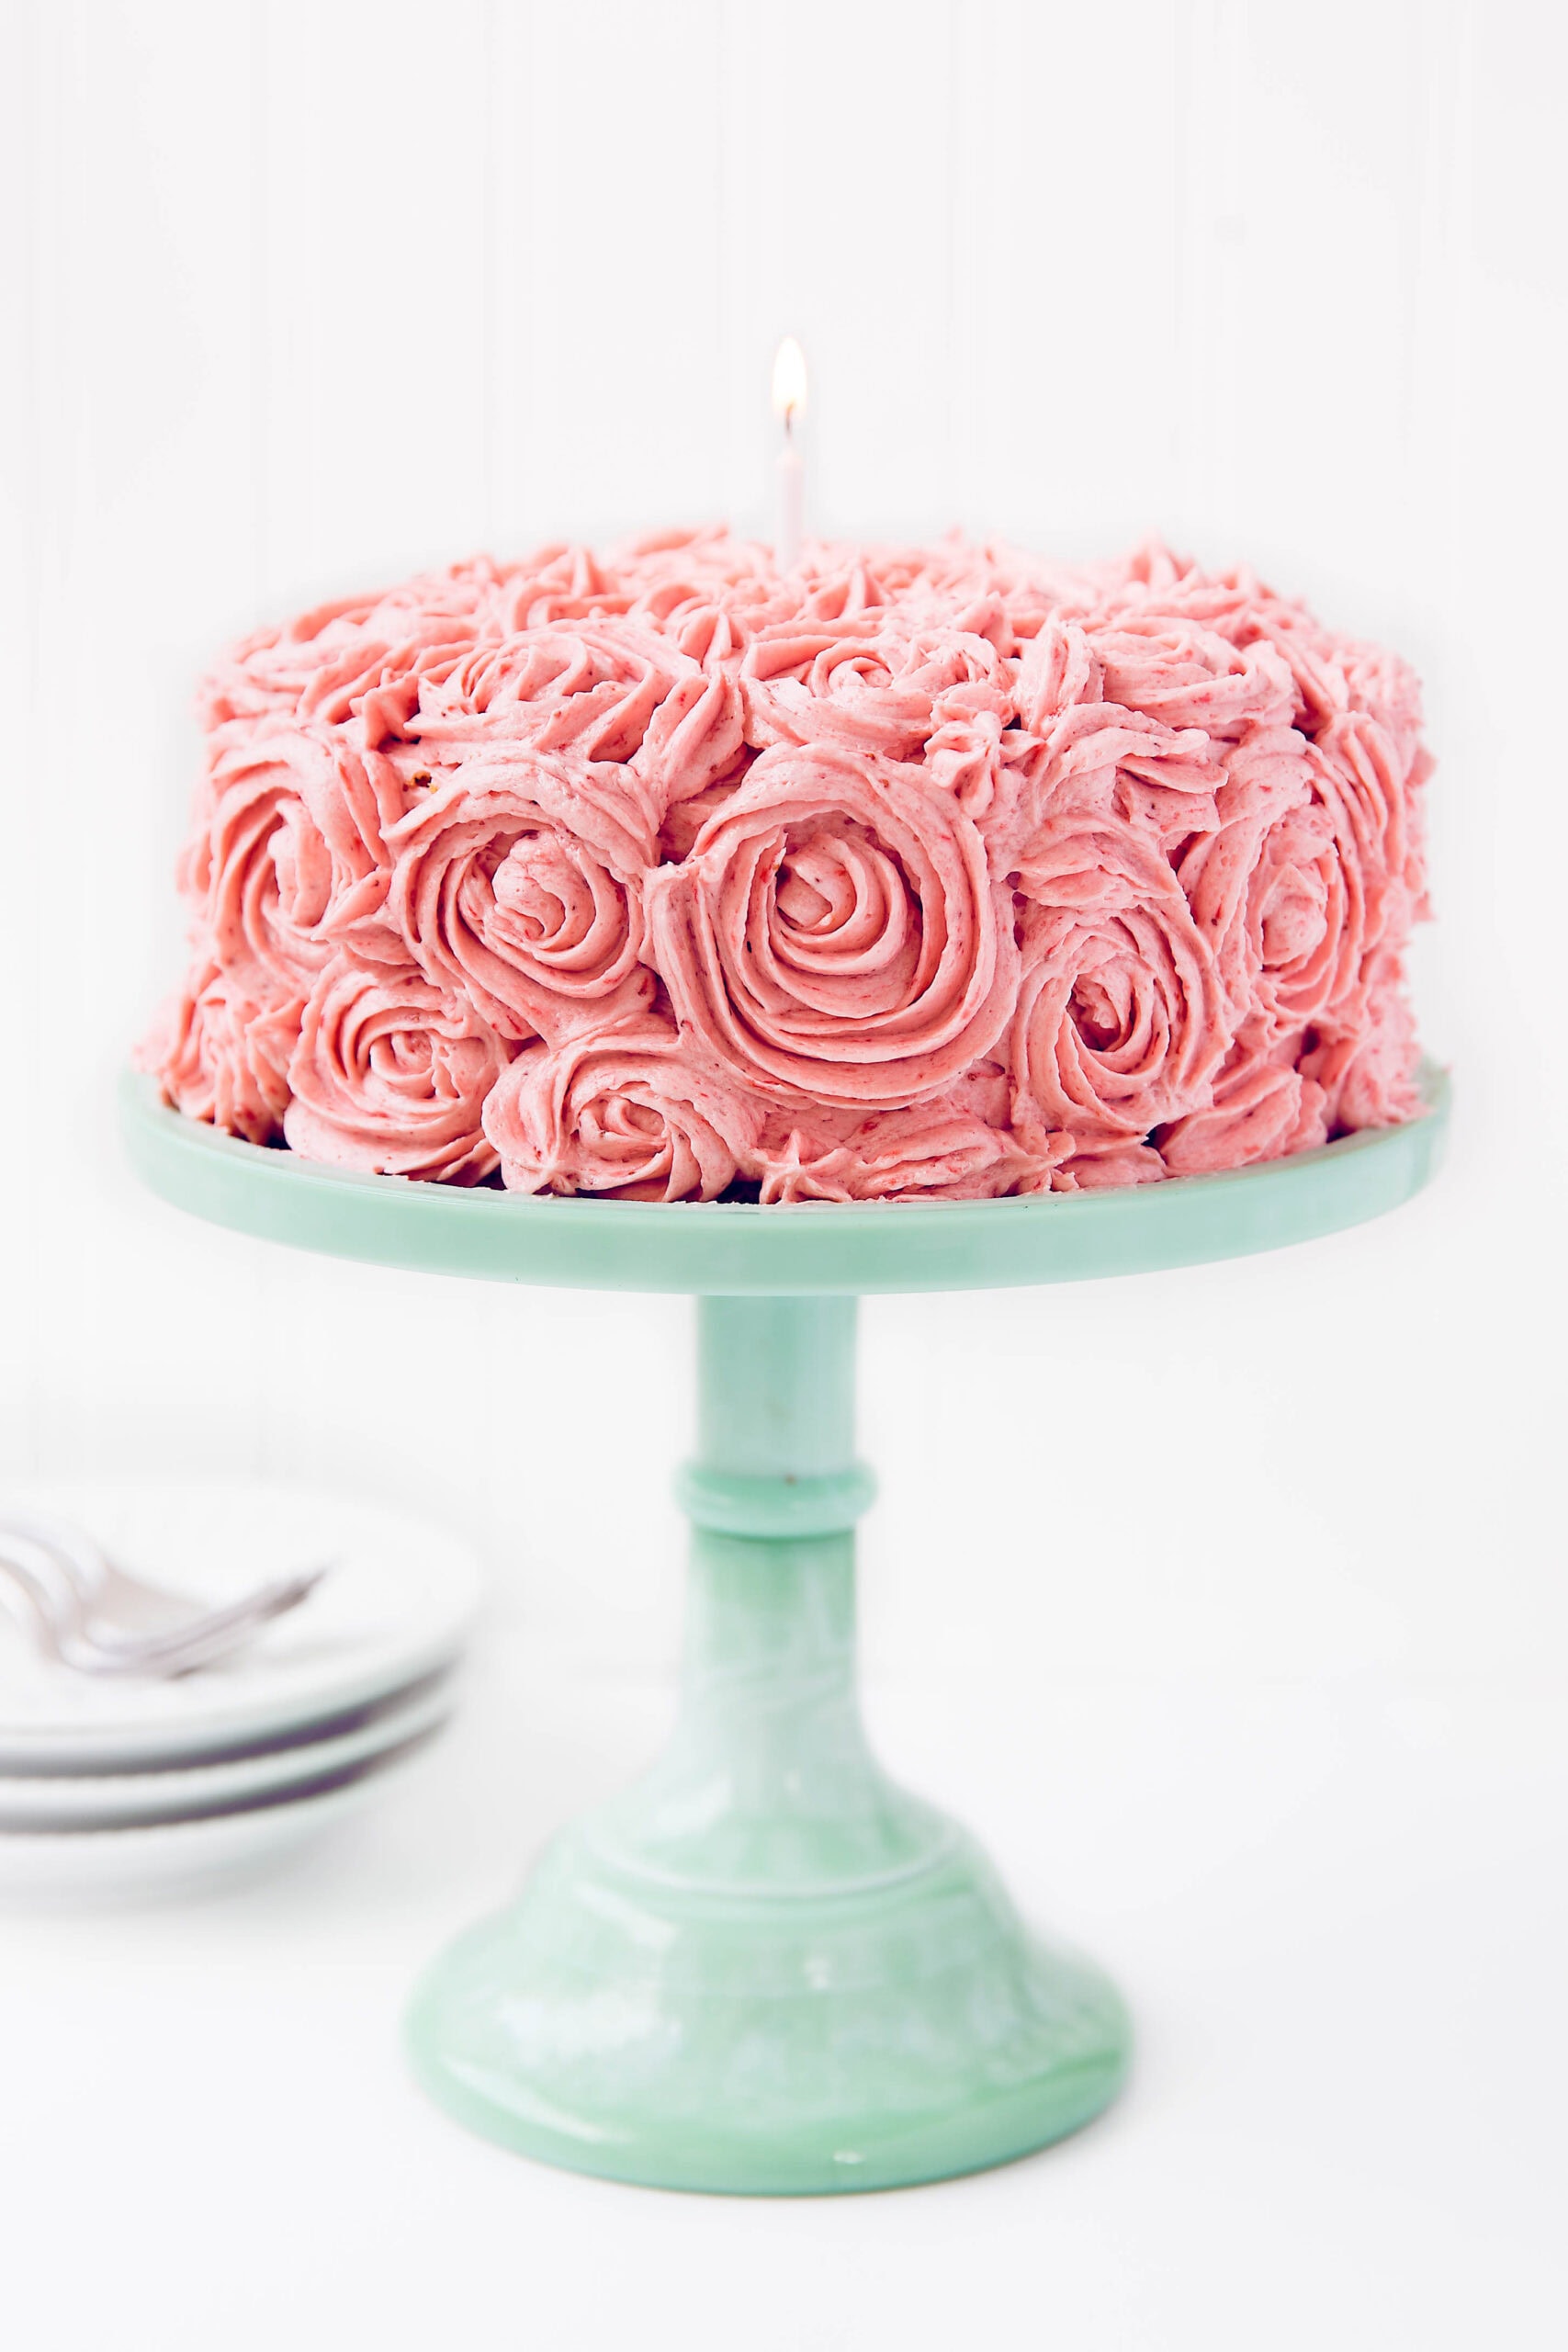 Strawberry Almond Birthday Cake: an almond-flavored cake with fresh strawberry buttercream roses